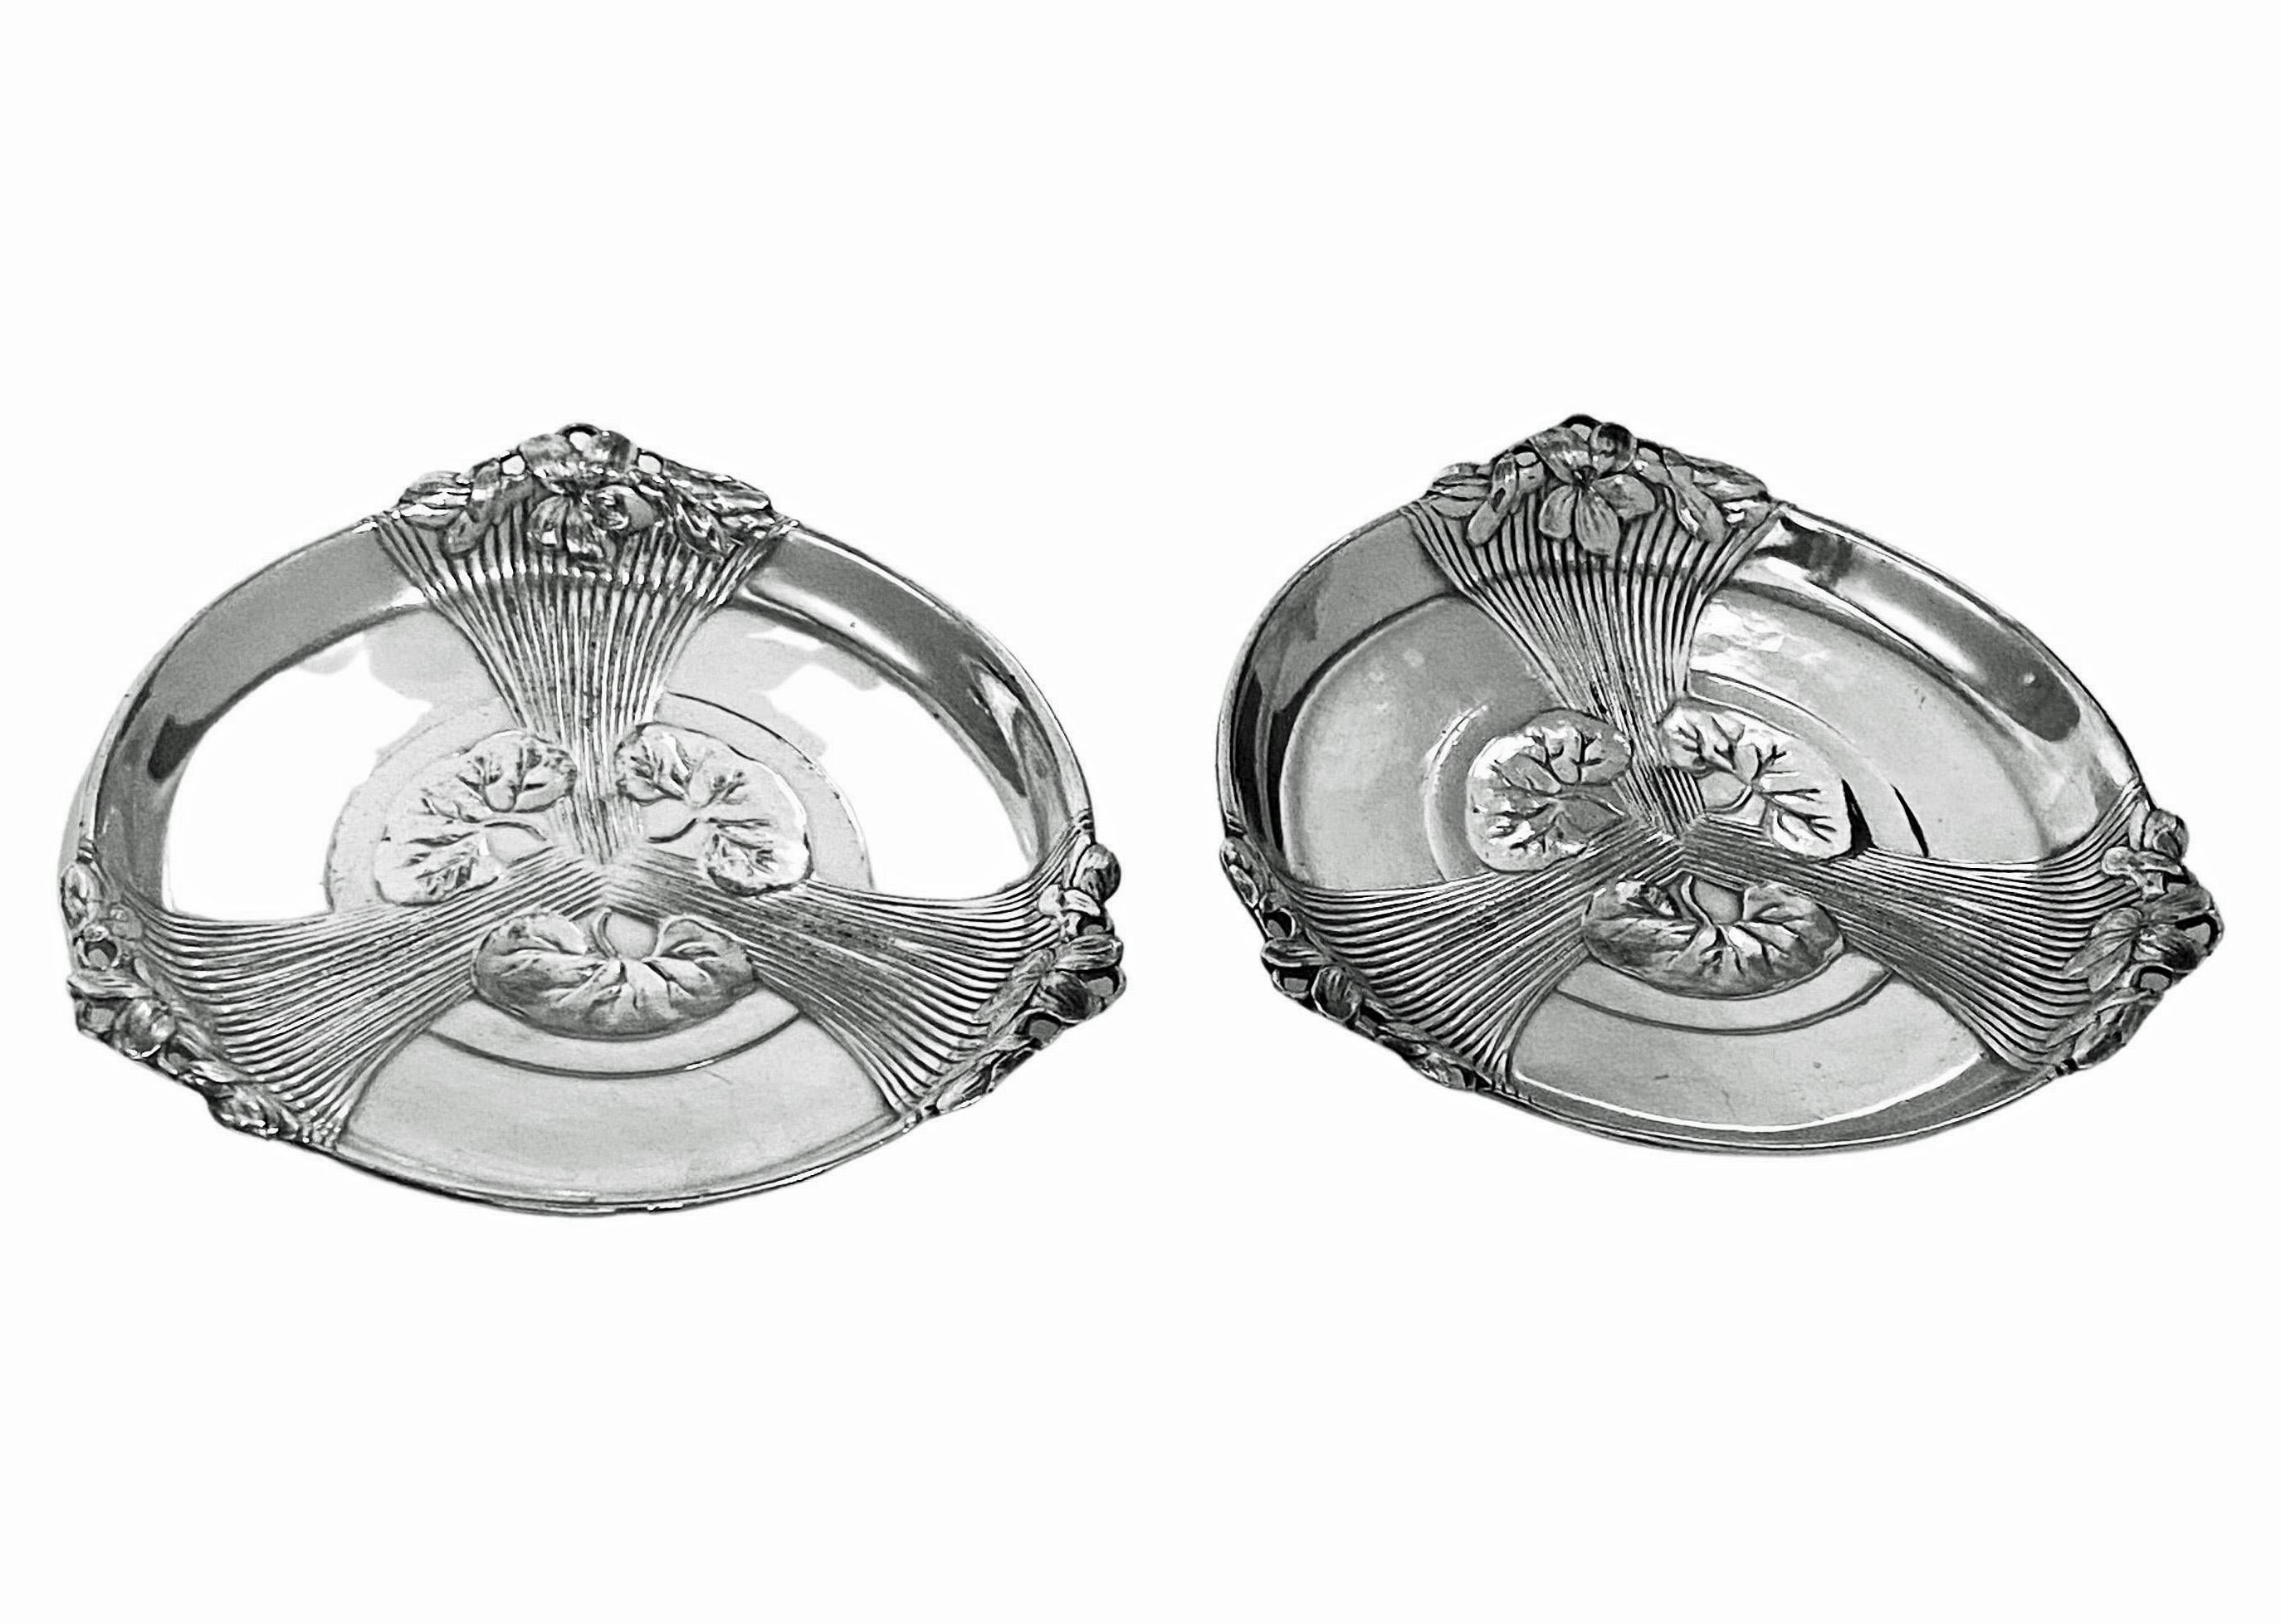 Pair of Christofle Art Nouveau Wine Bottle Holders Coasters C.1910. Stylised Art Nouveau silver plate coasters in remarkable condition for the age. Rare to find this design. Fit any size bottles and bottles lie flat. Diameter: 5.50 inches. Height: